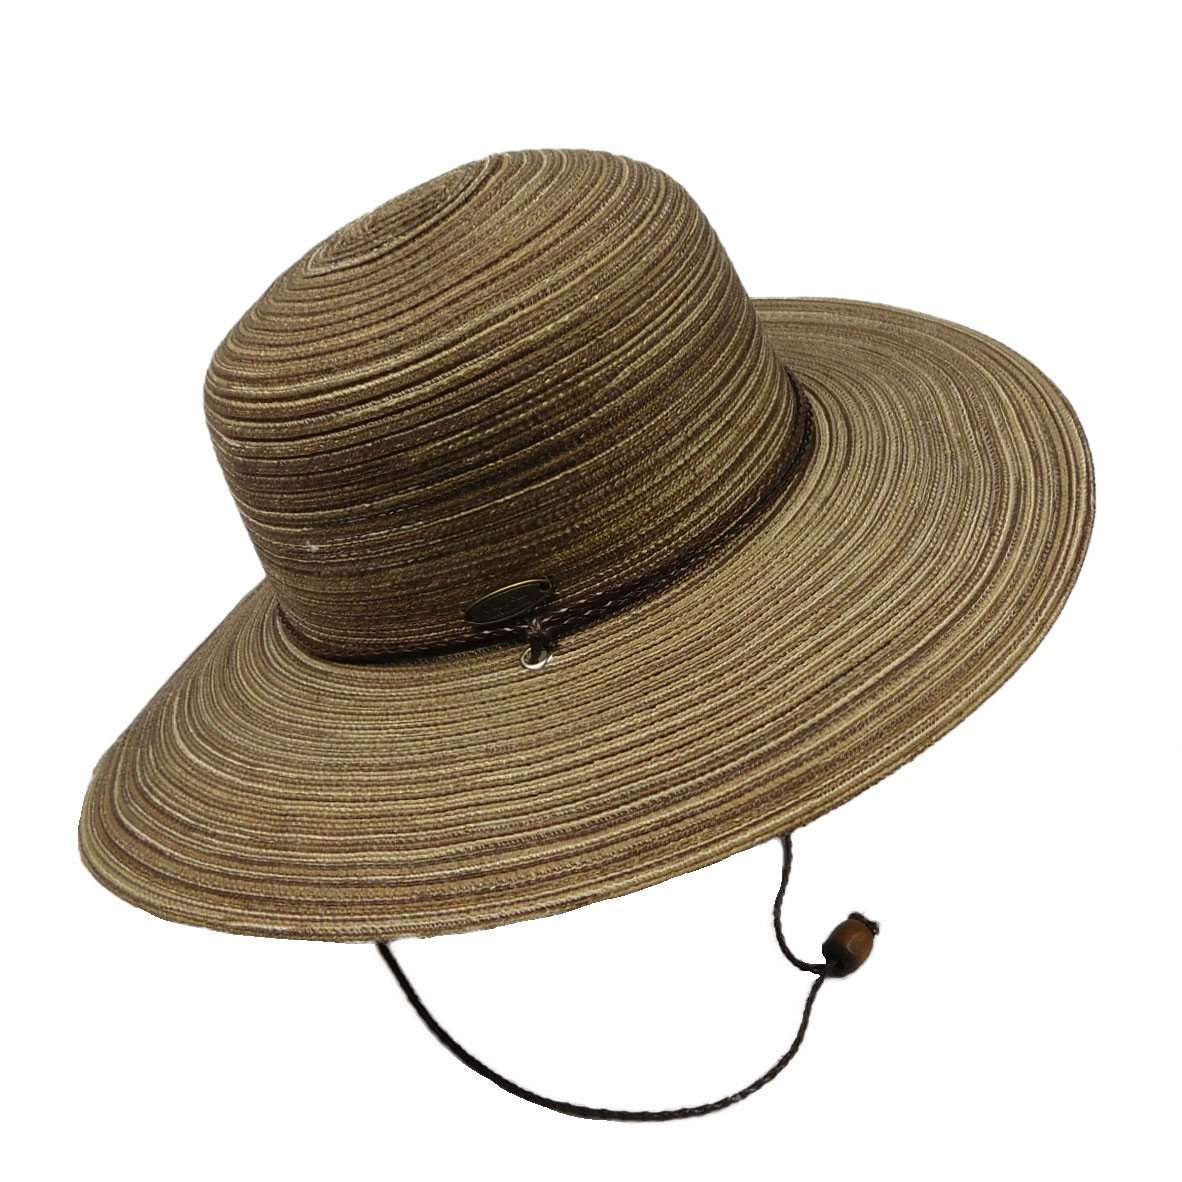 Floppy Hat with Chin Cord by Cappelli Floppy Hat Cappelli Straworld csw202BN Brown Medium (57 cm) 